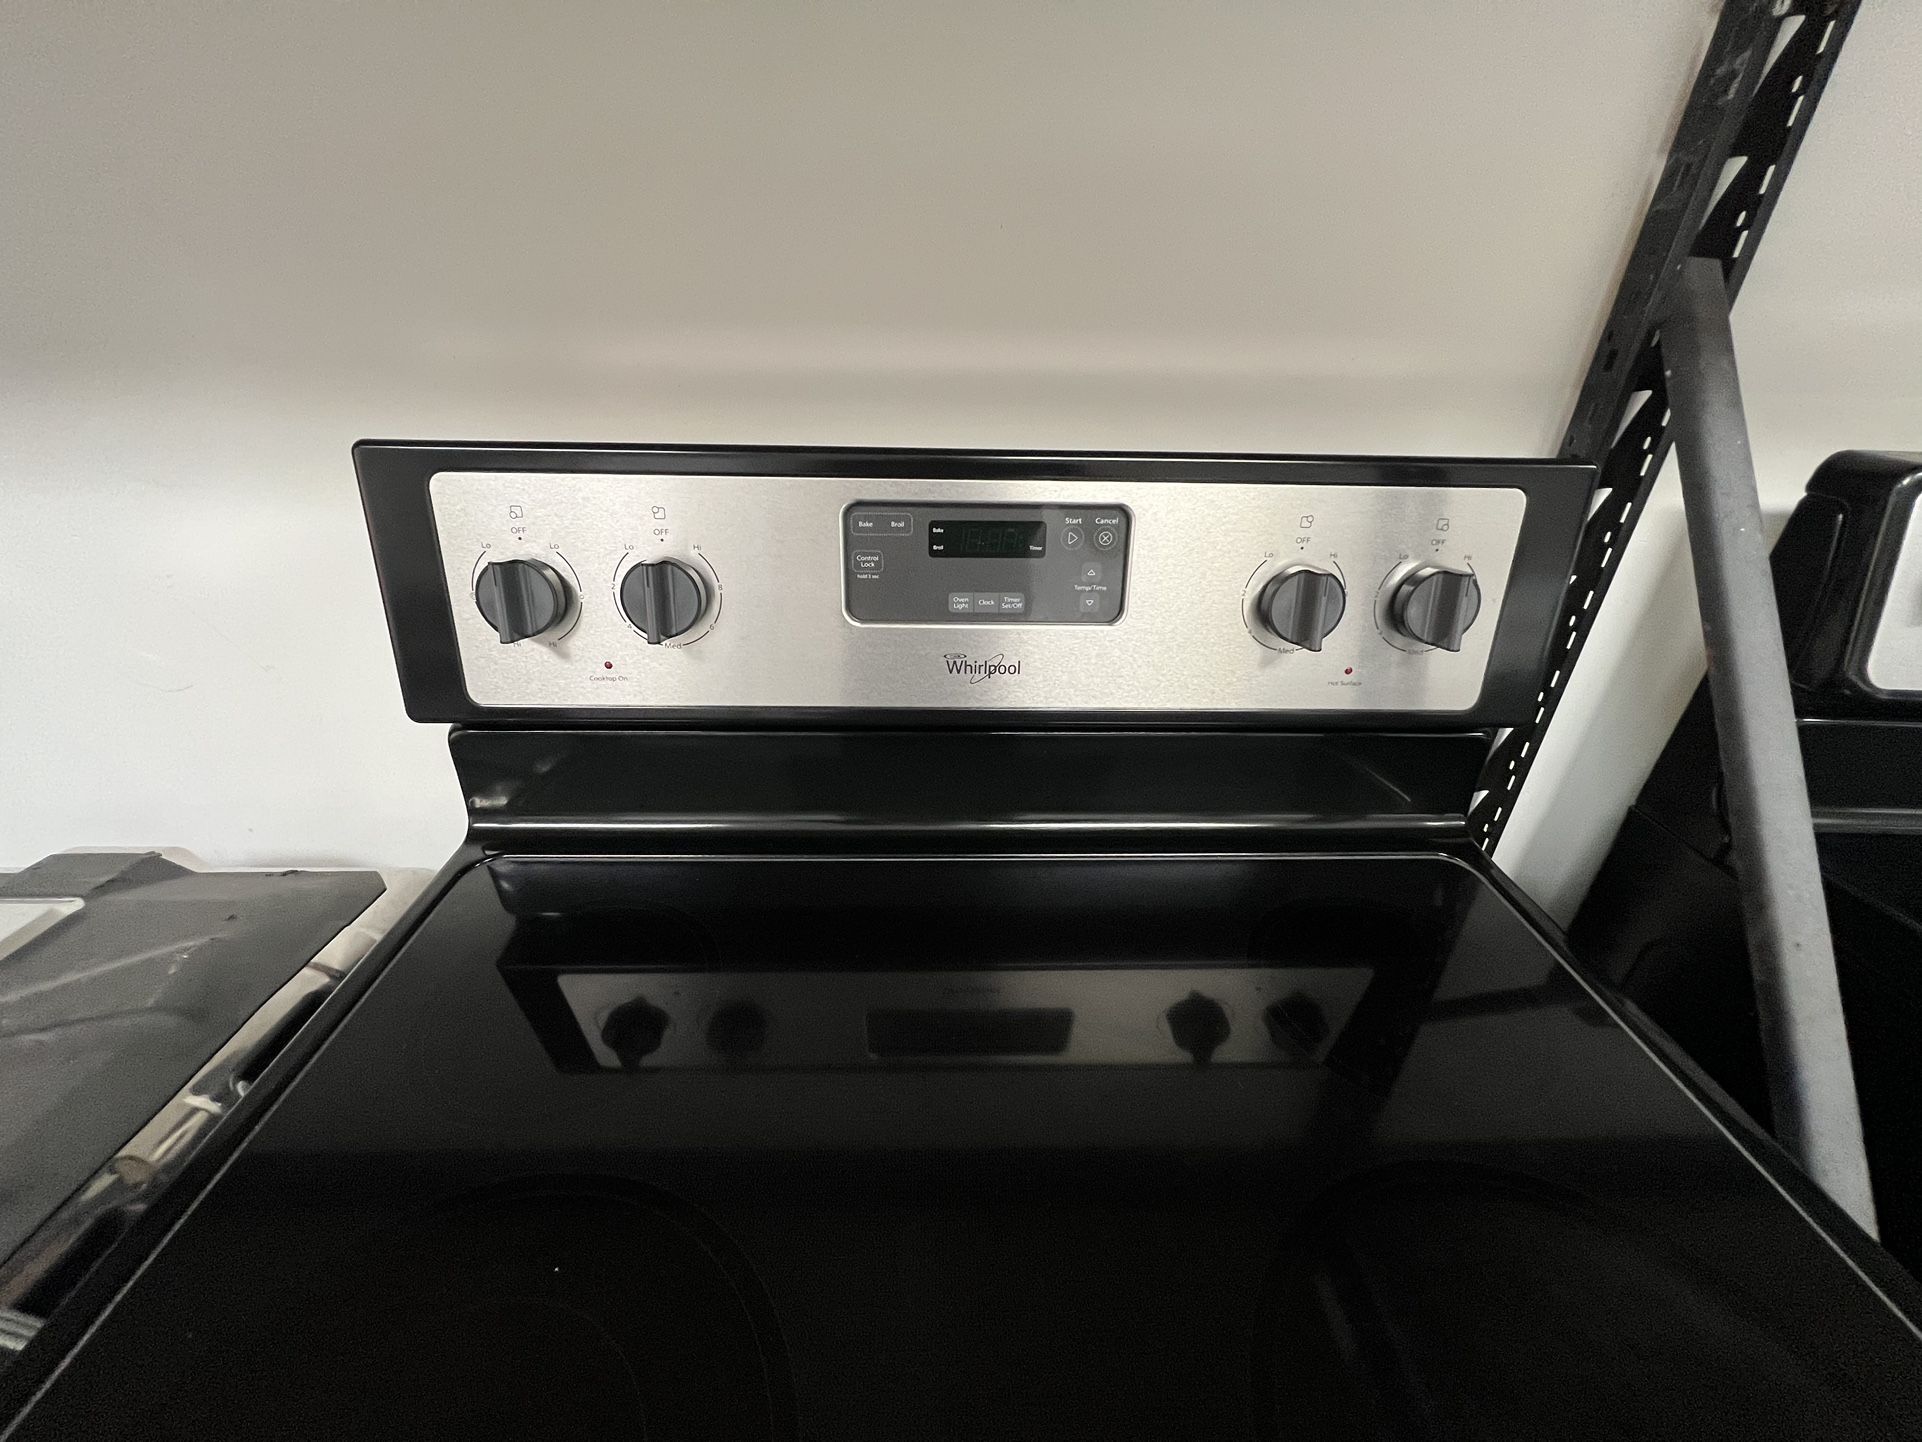 Electric Stove 30 “ Glass Top 